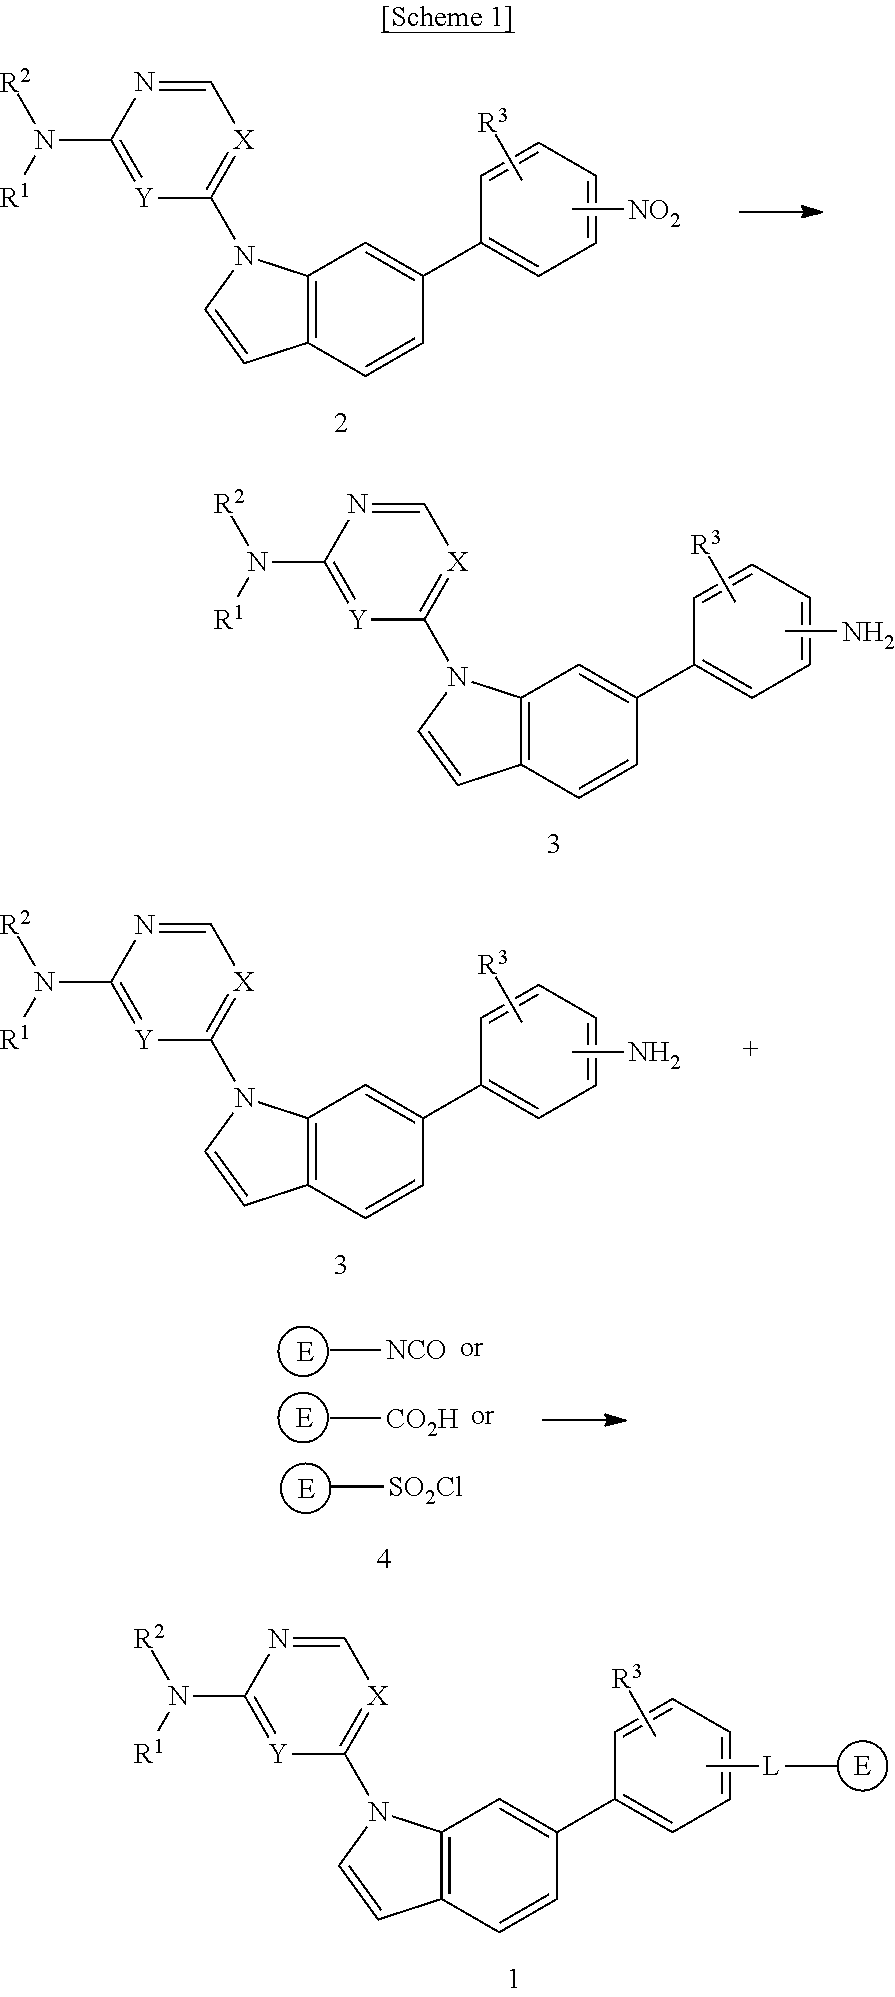 Novel 1,6-disubstituted indole compounds as protein kinase inhibitors